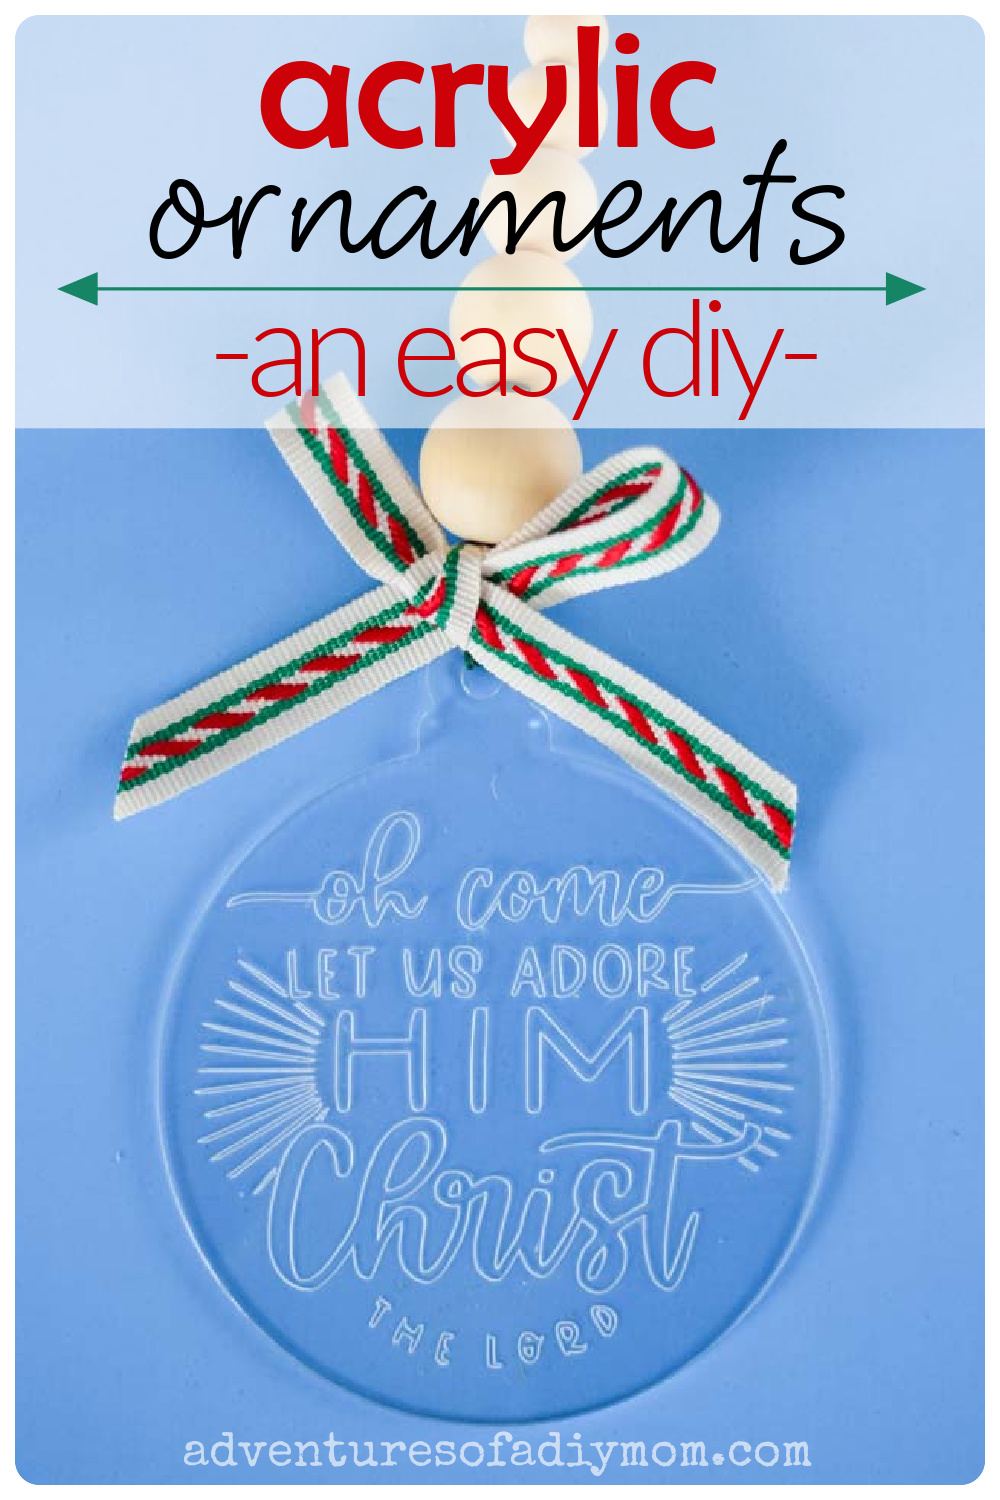 How to Engrave Acrylic Ornaments  Learn how to engrave acrylic ornaments  on your Cricut Maker, including how to add a name and center your engraving  on your ornament! Get the full